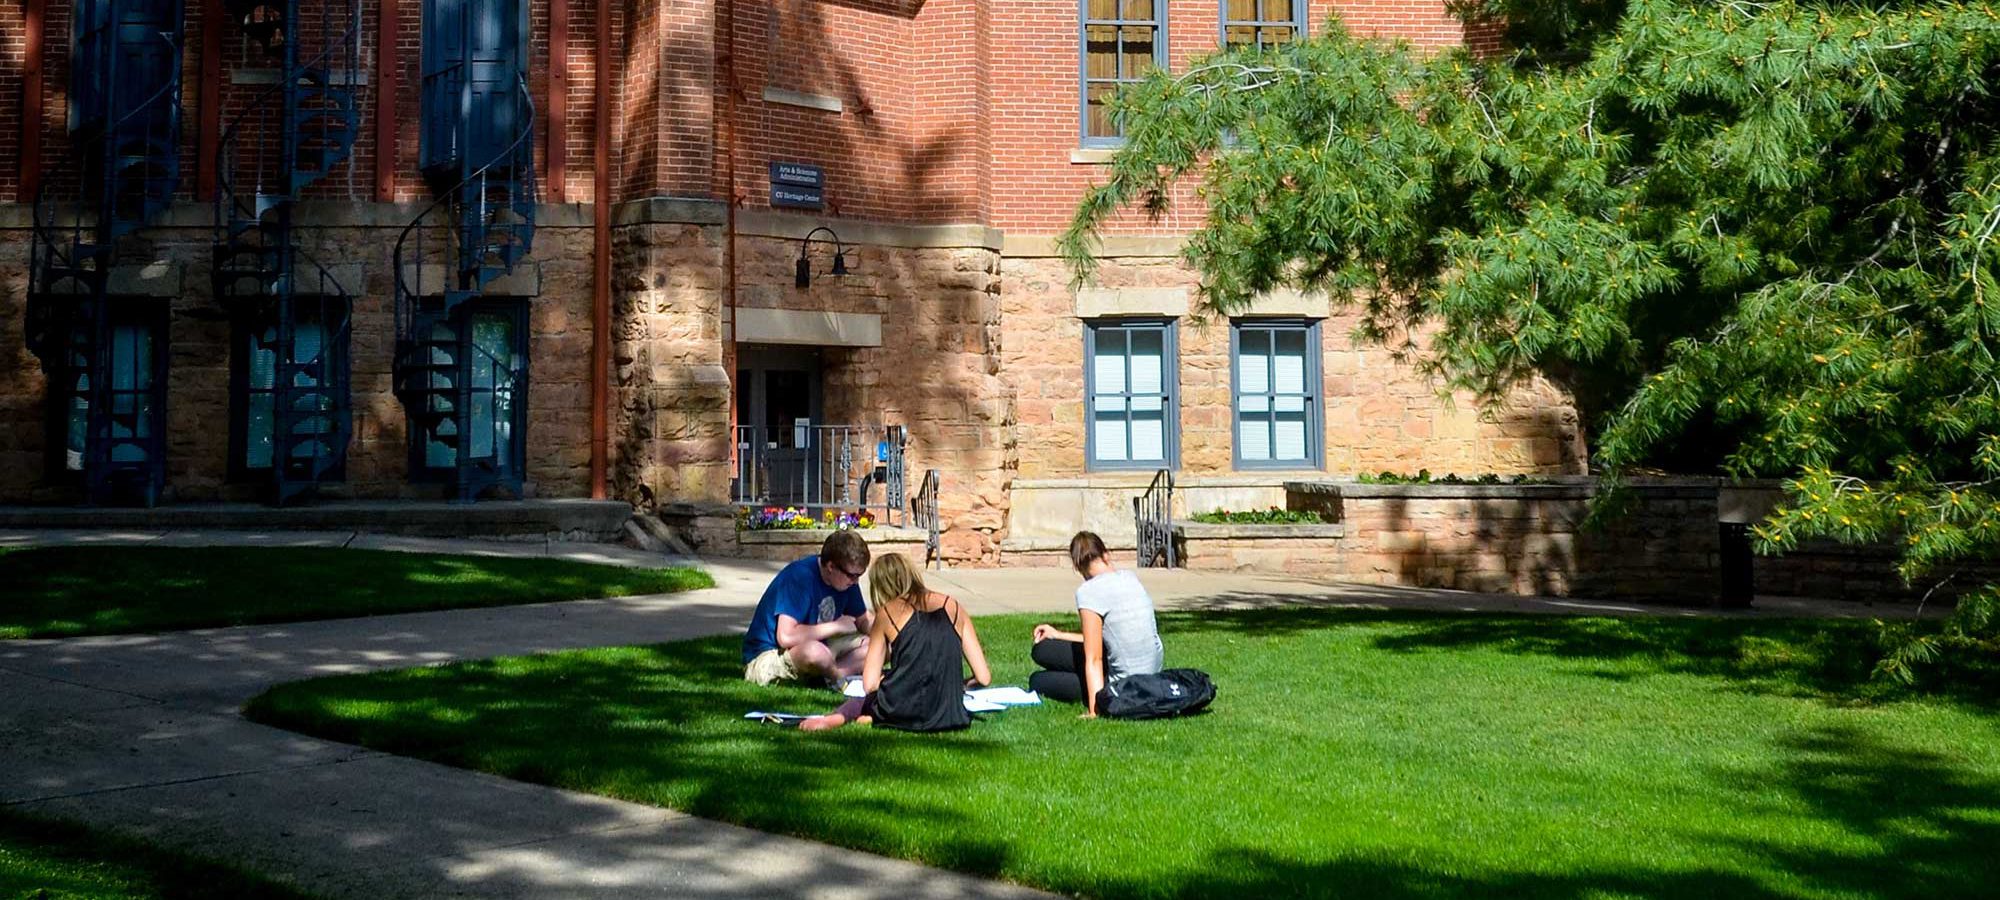 Students on Summer day